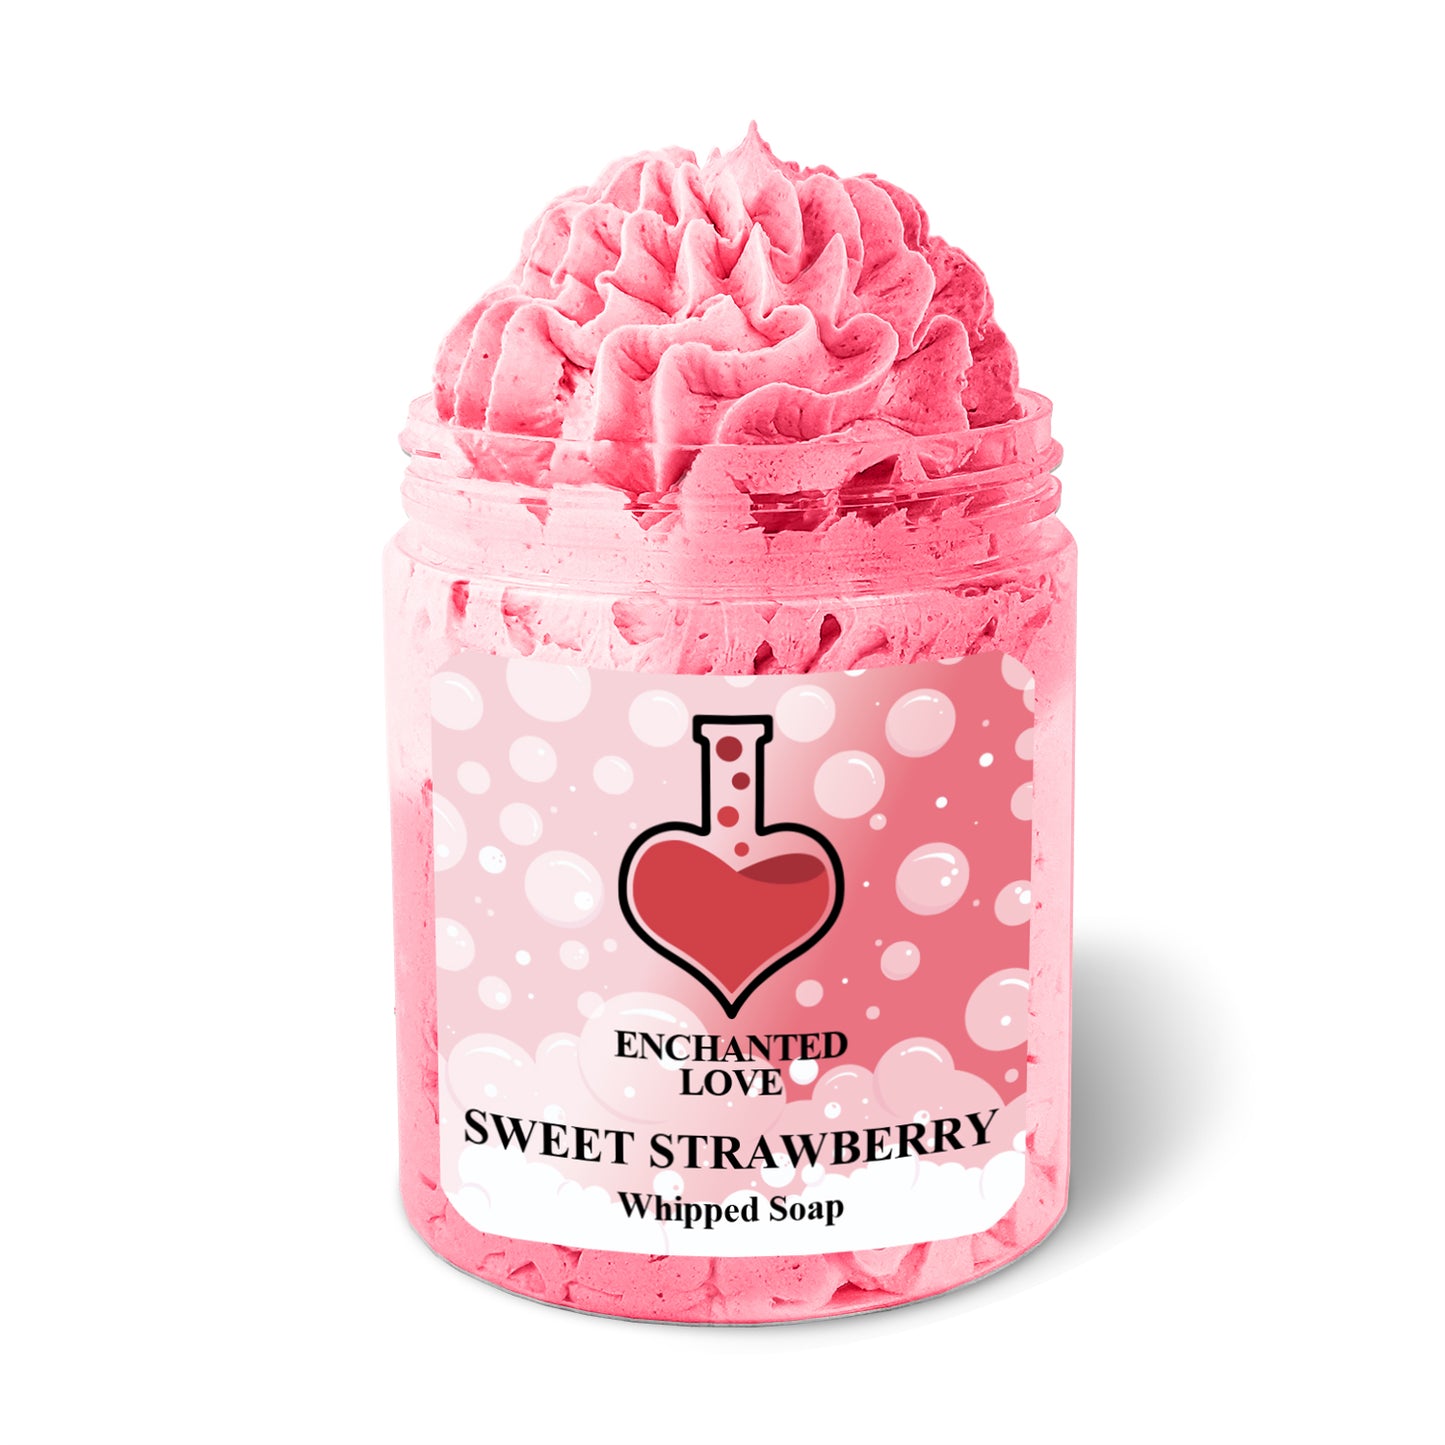 Sweet Strawberry Whipped Soap